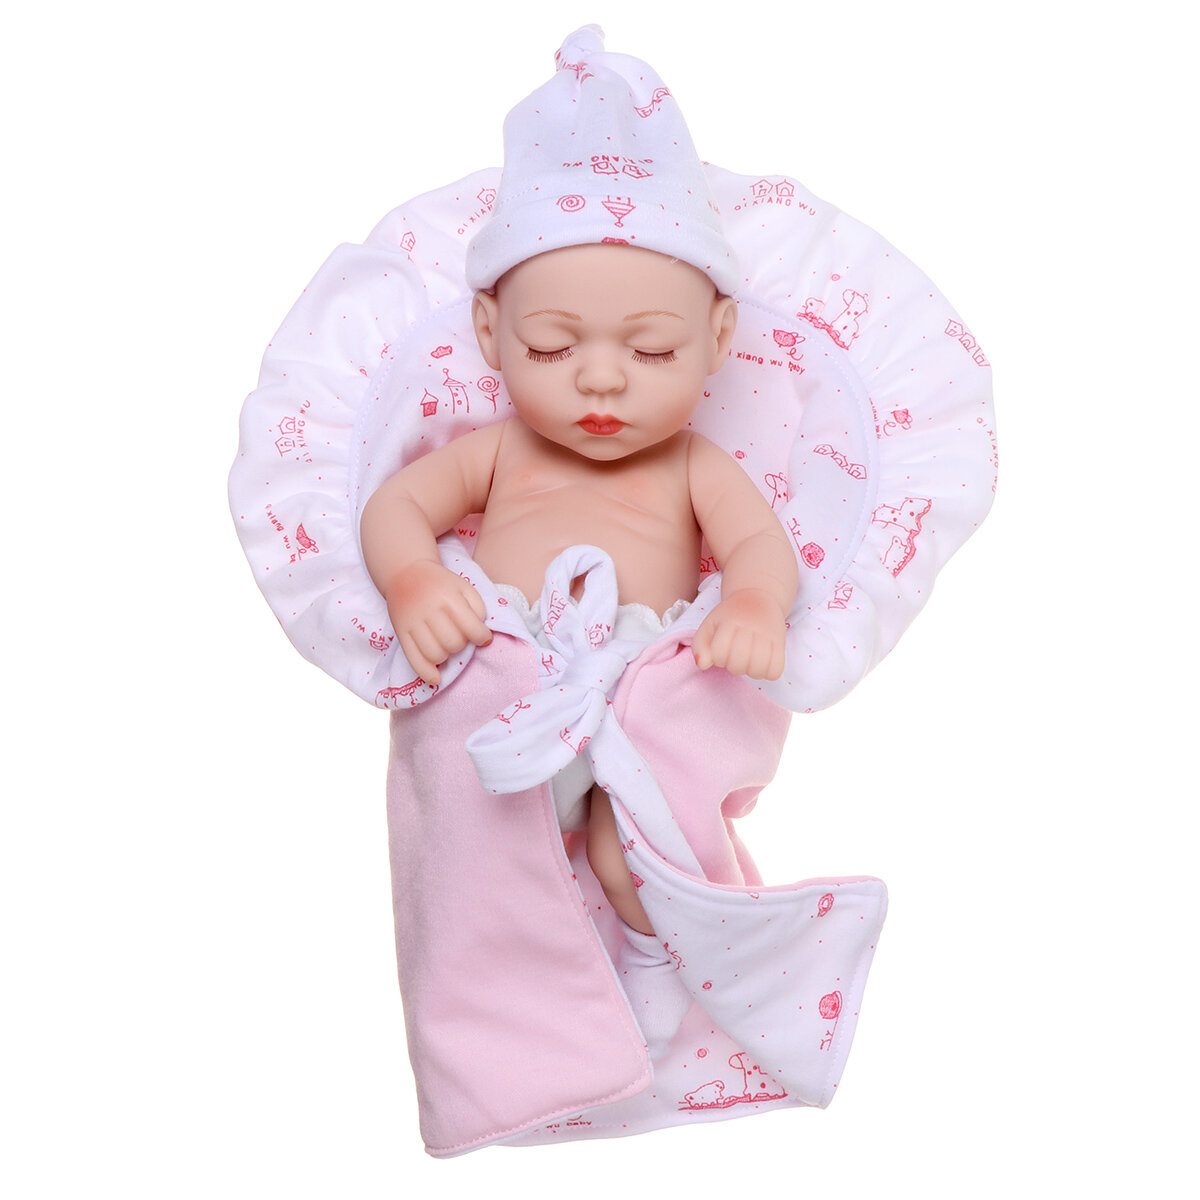 30cm Simulation Silicone Figure Baby Doll Toy Kids Early Education Toy Children Gift